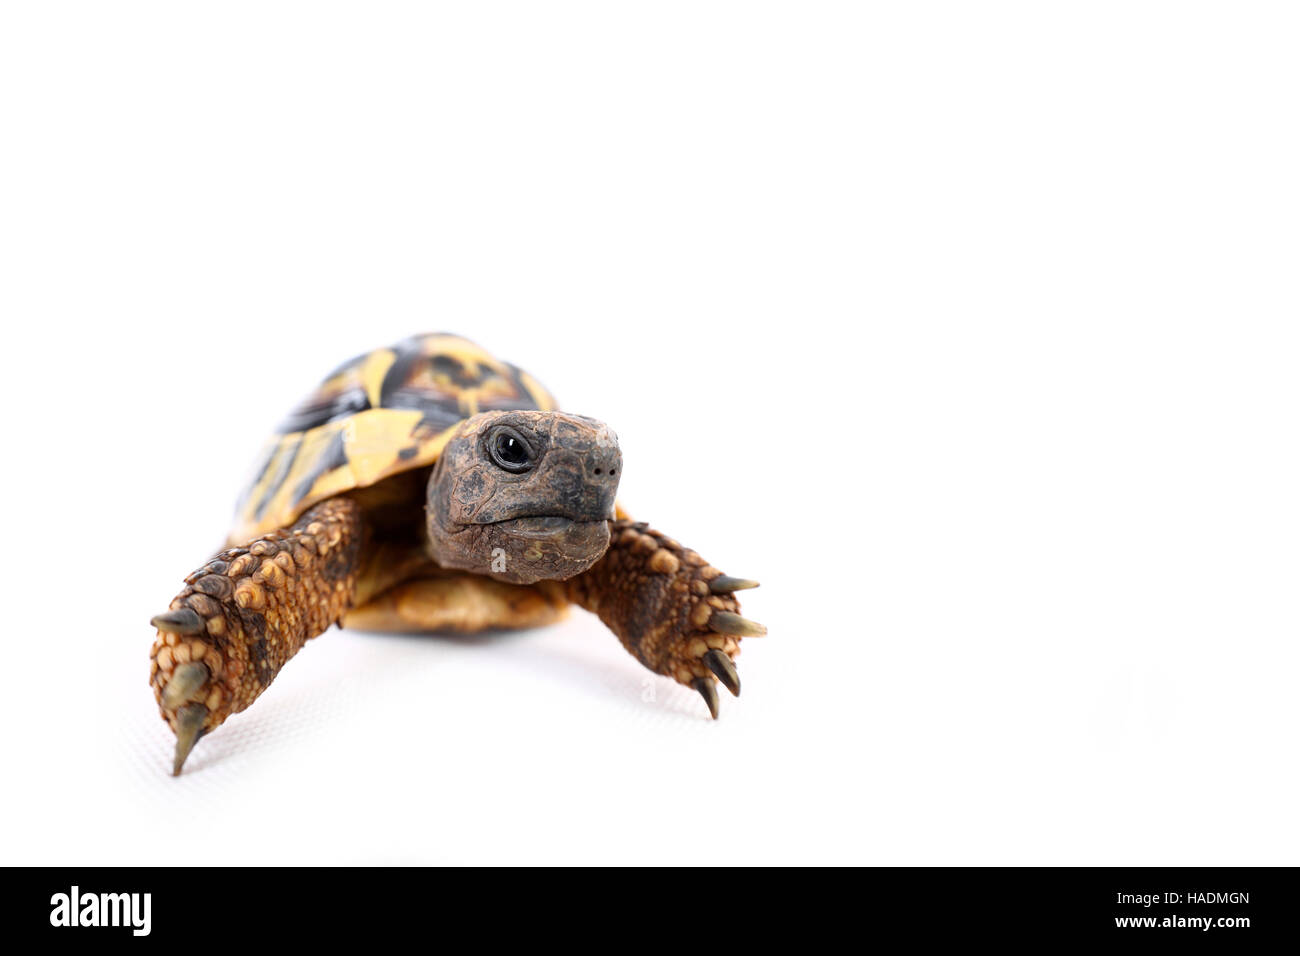 Hermanns Tortoise (Testudo hermanni). Adult seen head-on. Studio picture against a white background. Germany Stock Photo